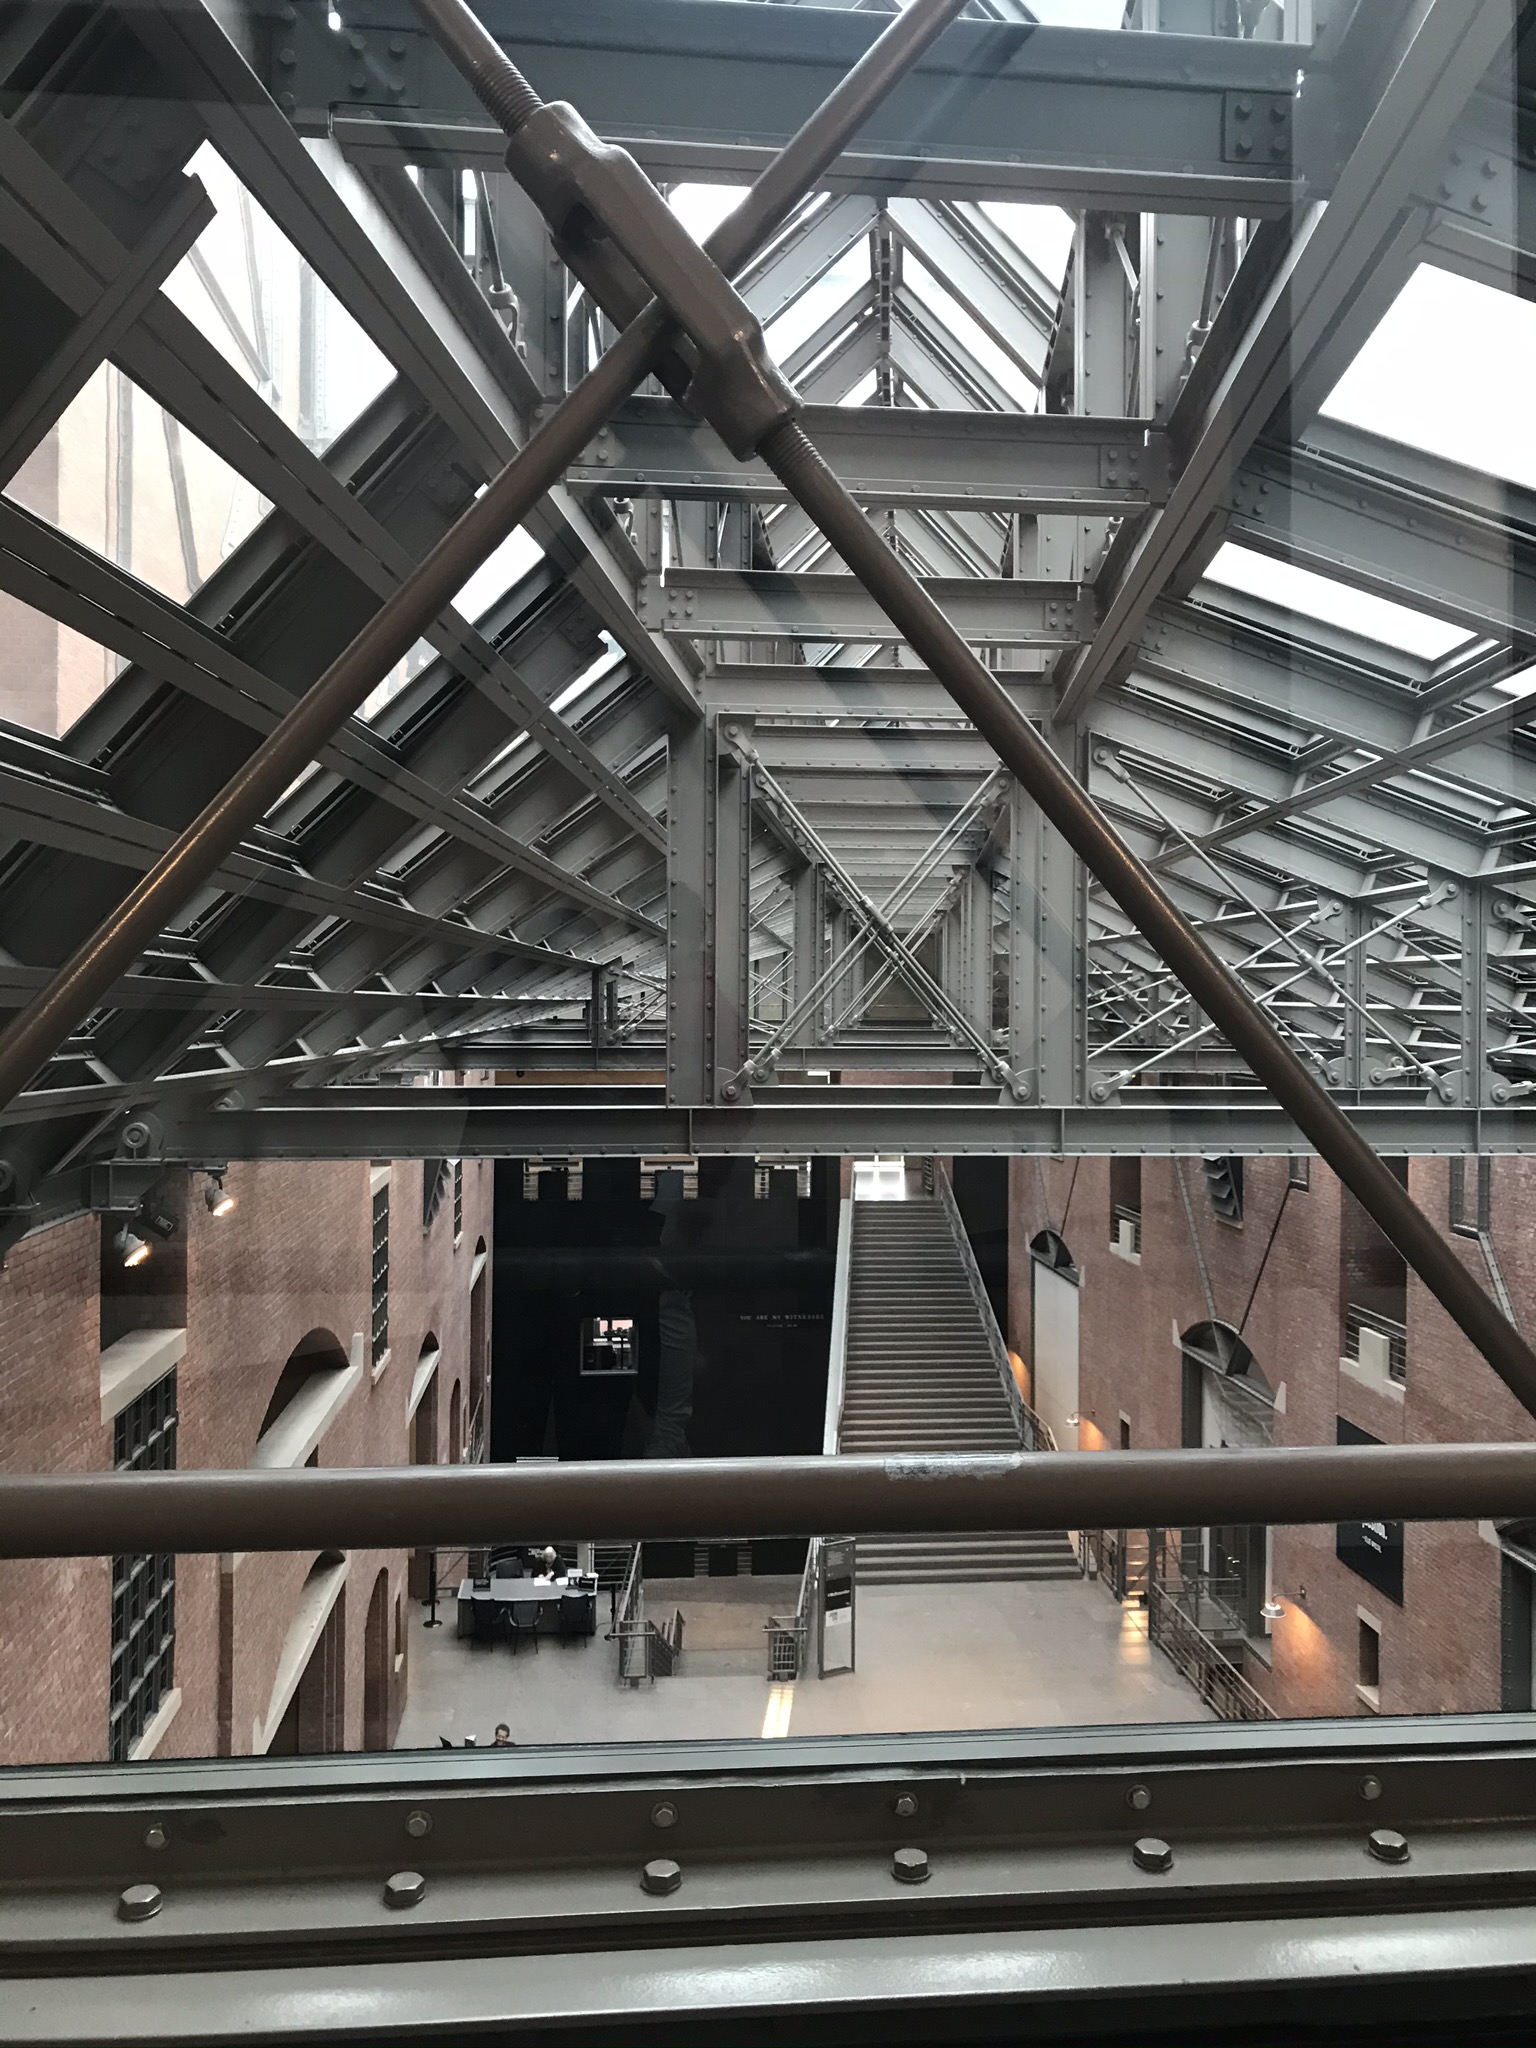 Image of the Interior of the United States Holocaust Memorial Museum